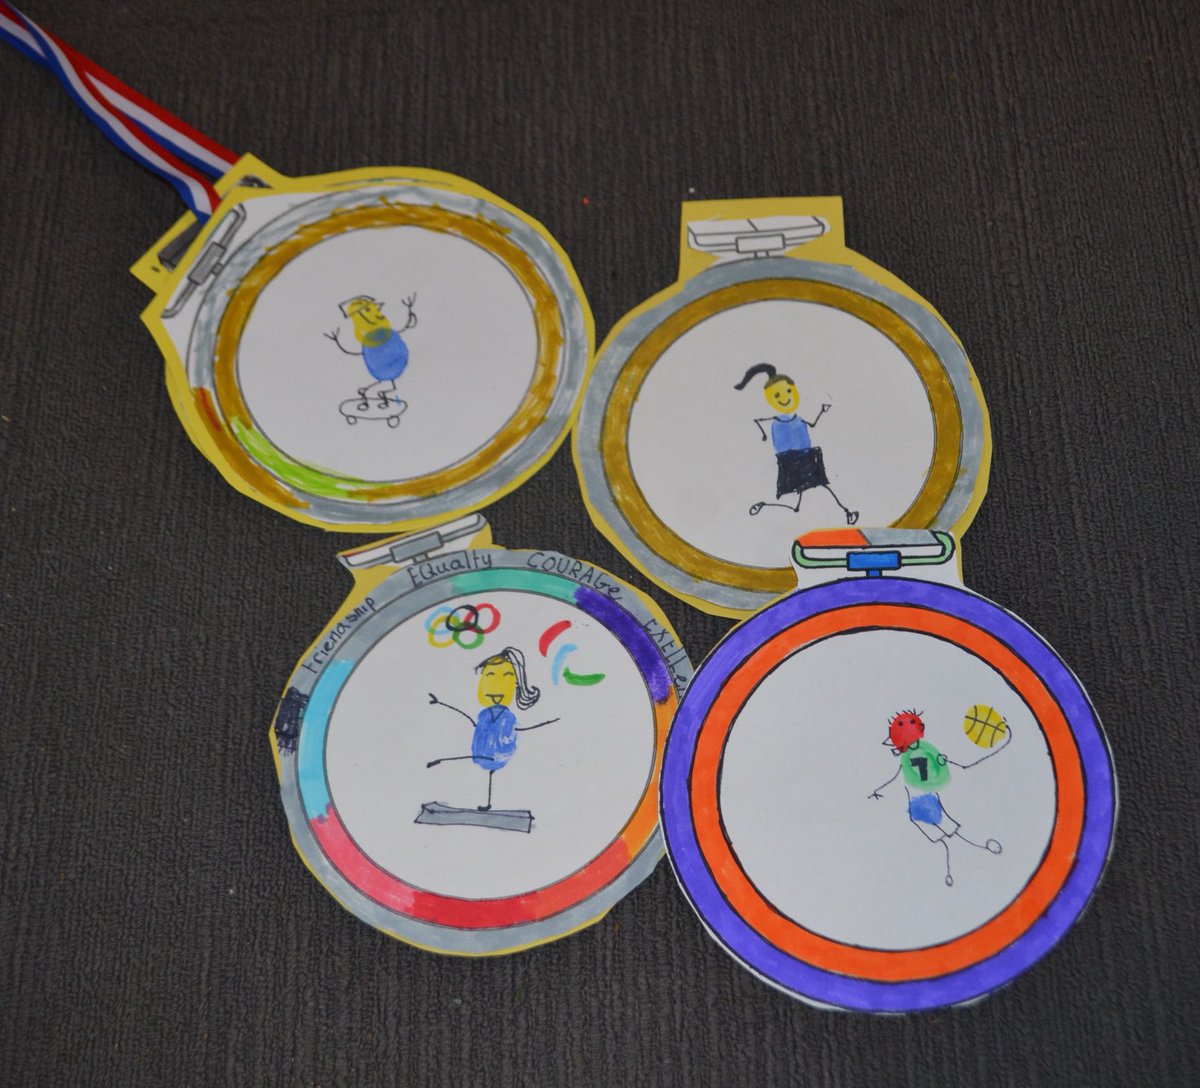 Year 2 have made medals, representing different sports #ThemeWeek24